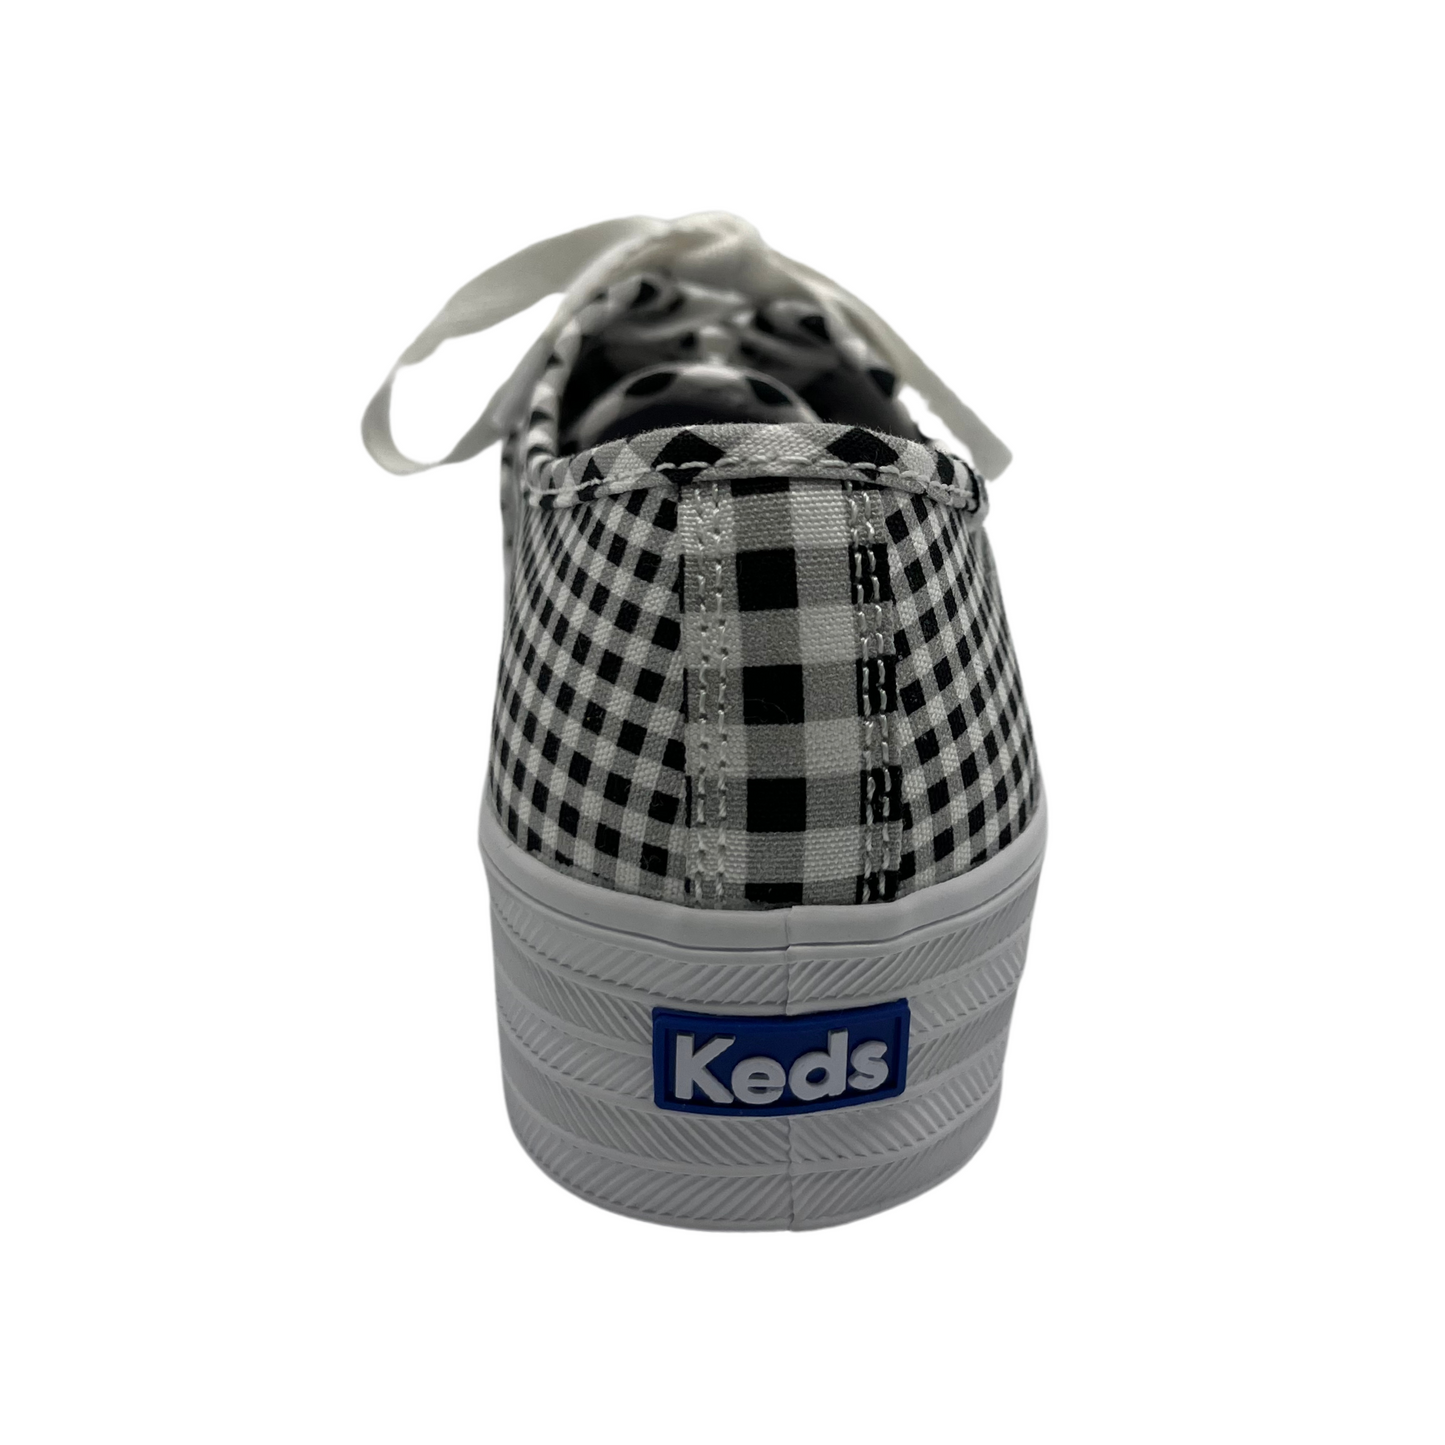 Back view of platform, pointed toe sneaker with white laces and black and white gingham design